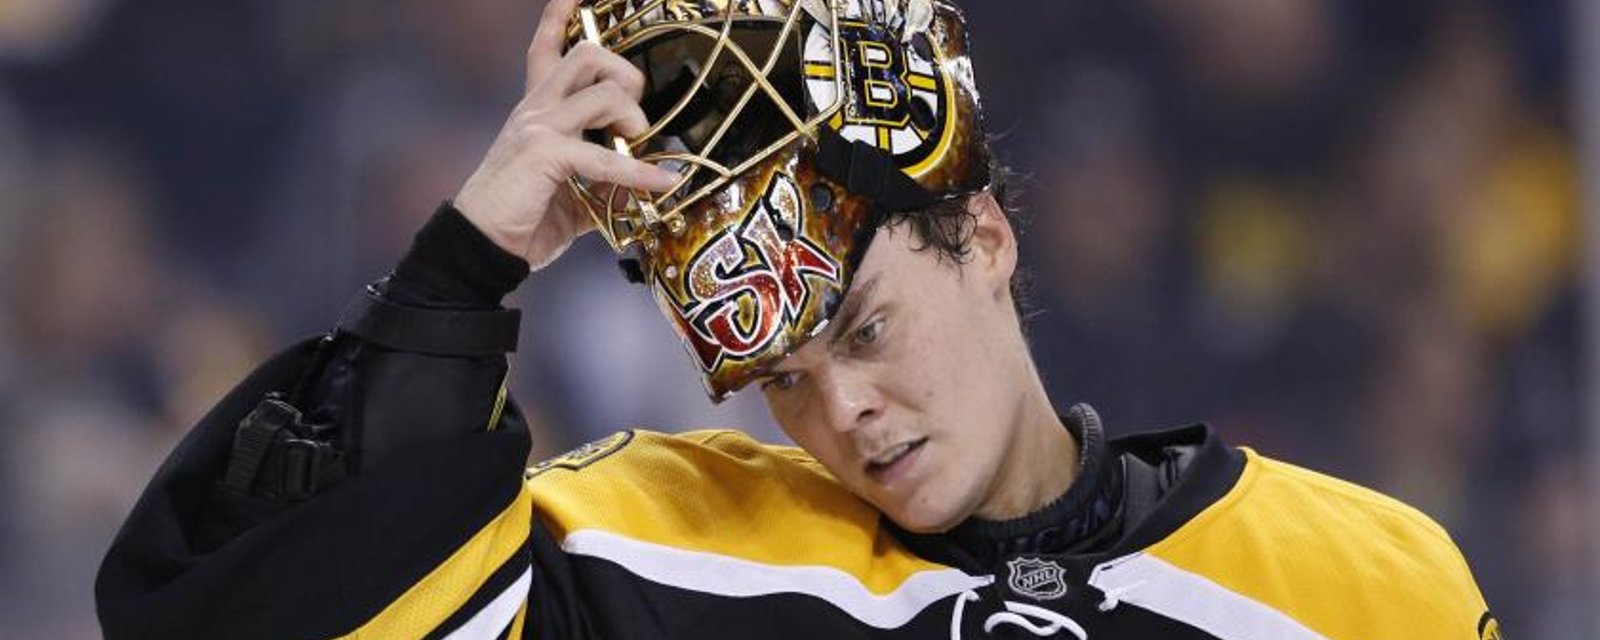 Tuukka Rask gets destroyed on social media after ranking 2nd-best in the NHL!